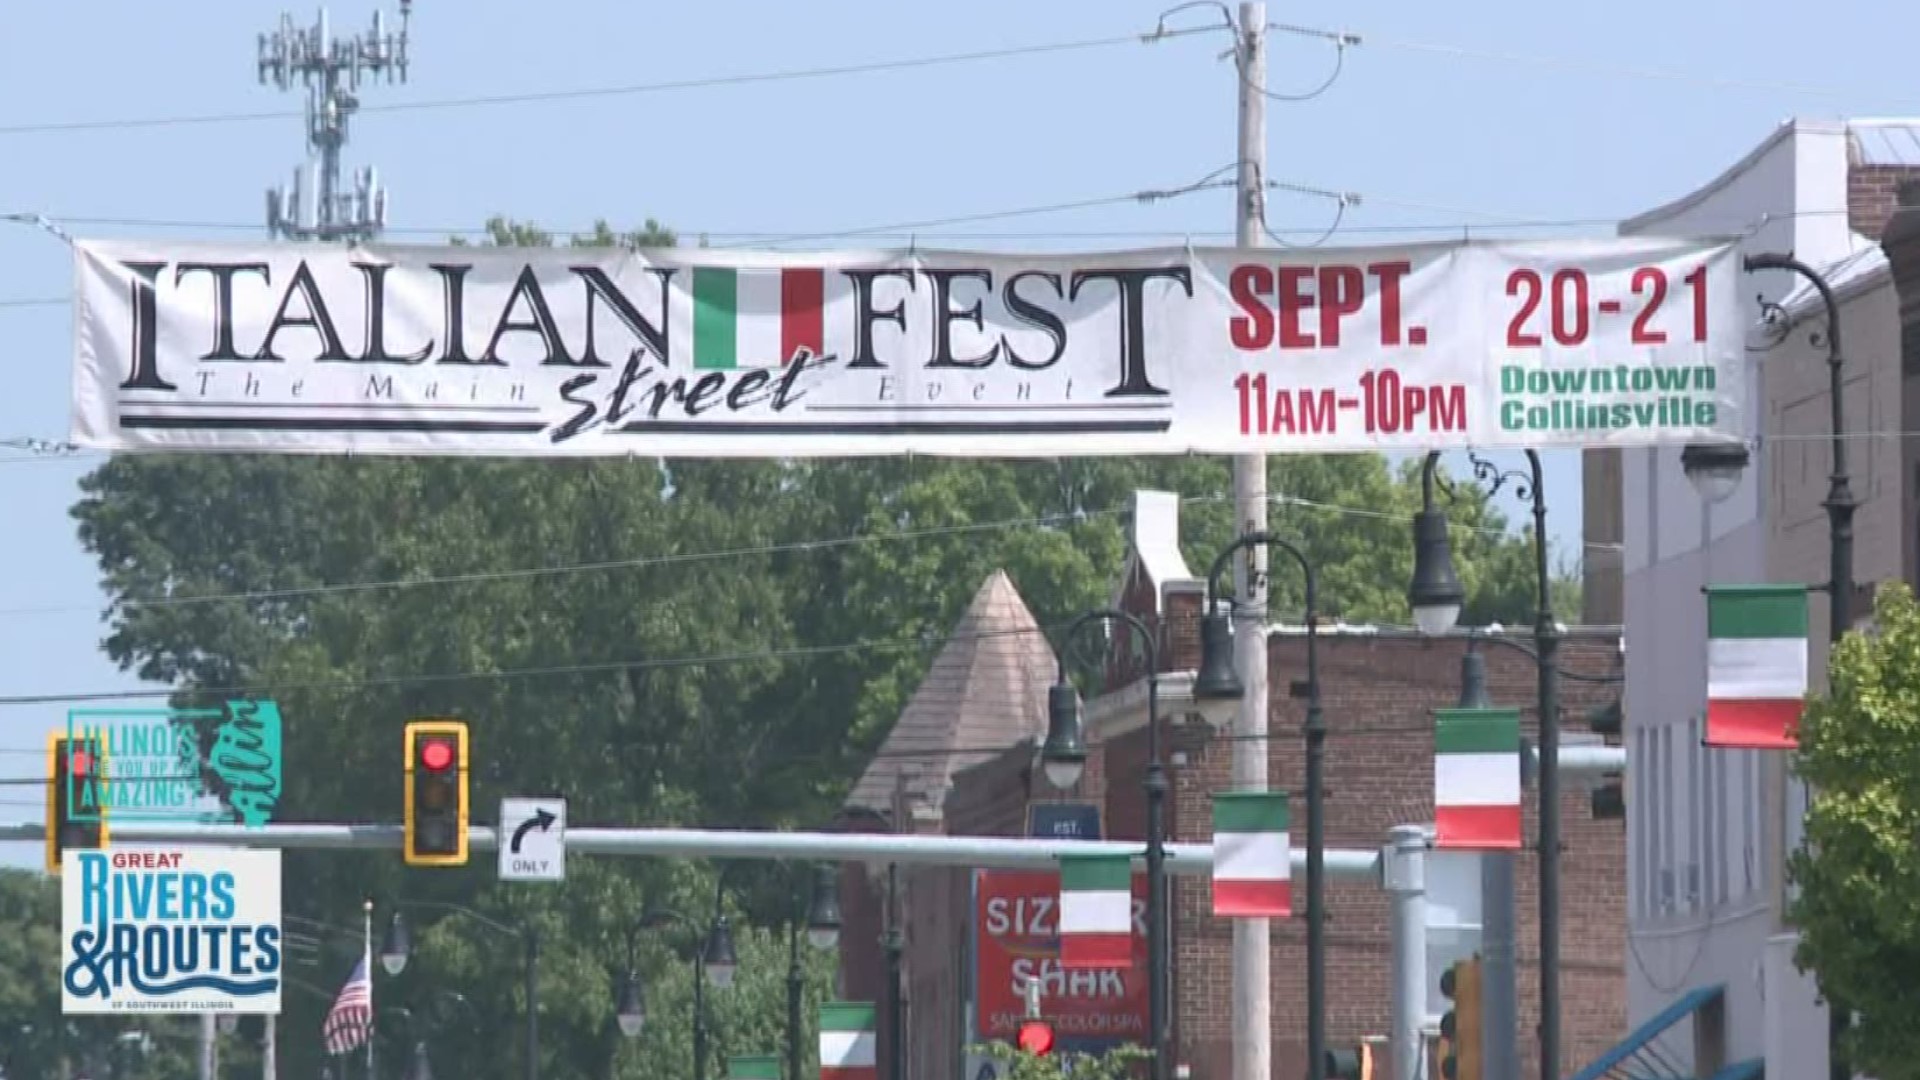 Great Rivers & Routes Italian Fest happening in Collinsville